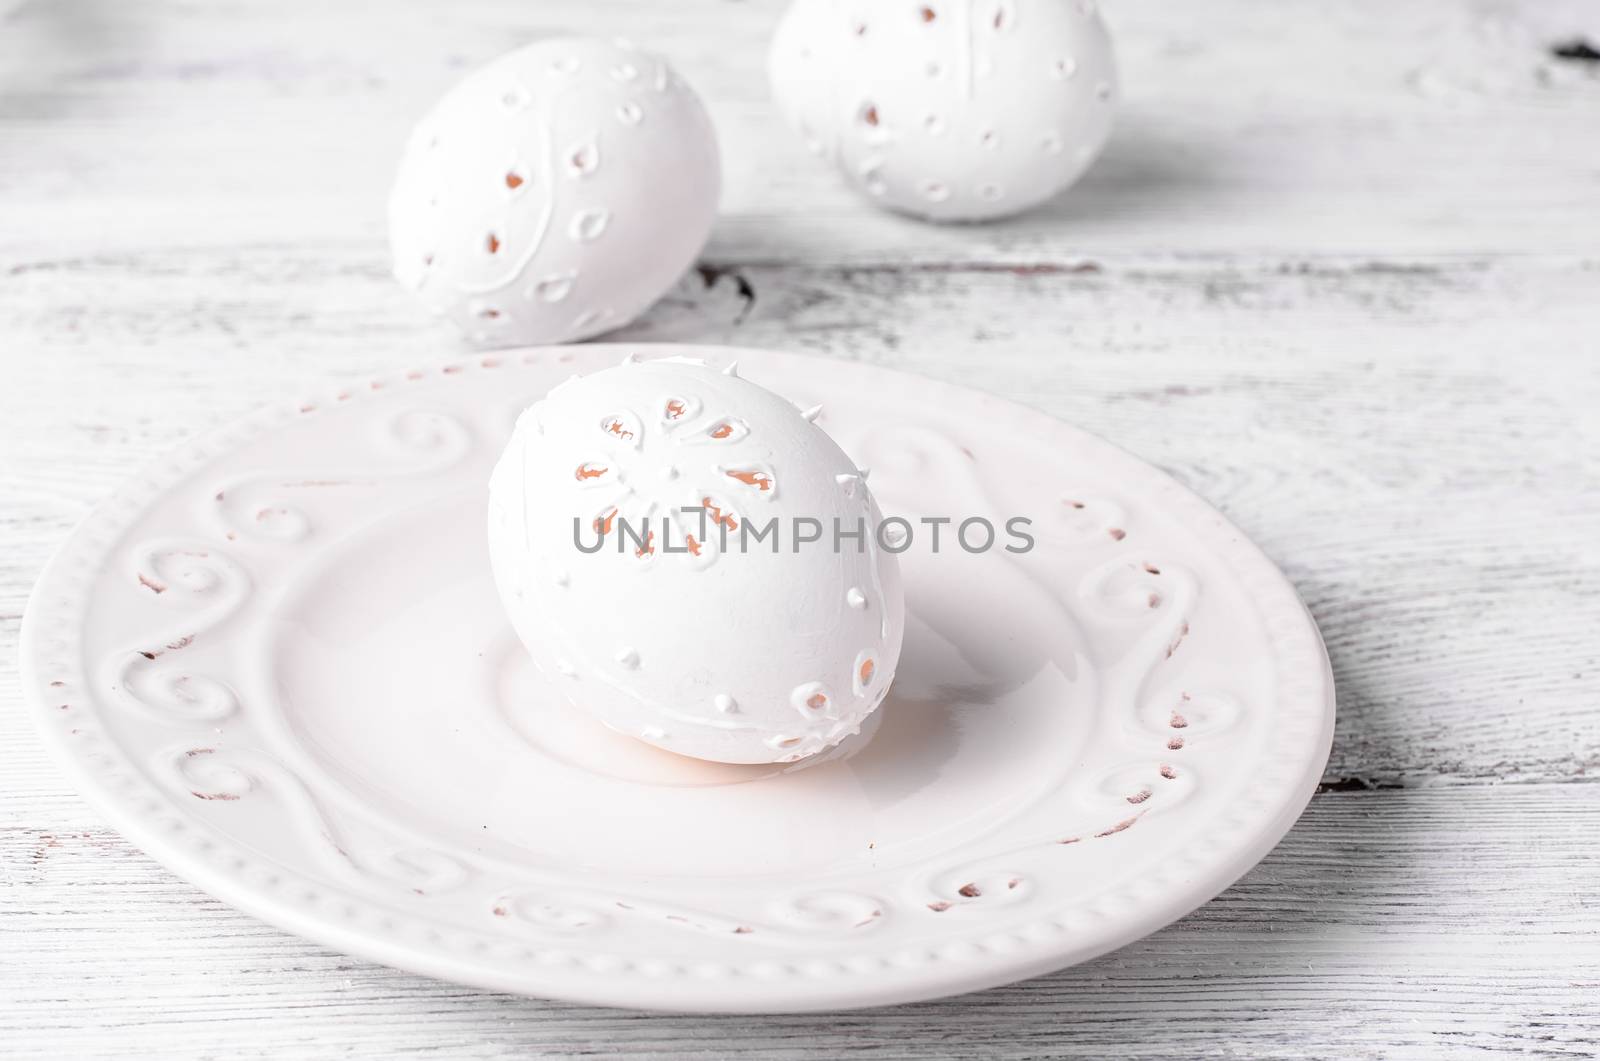 Easter eggs with cut out pattern by hand on light background.The photograph high key.